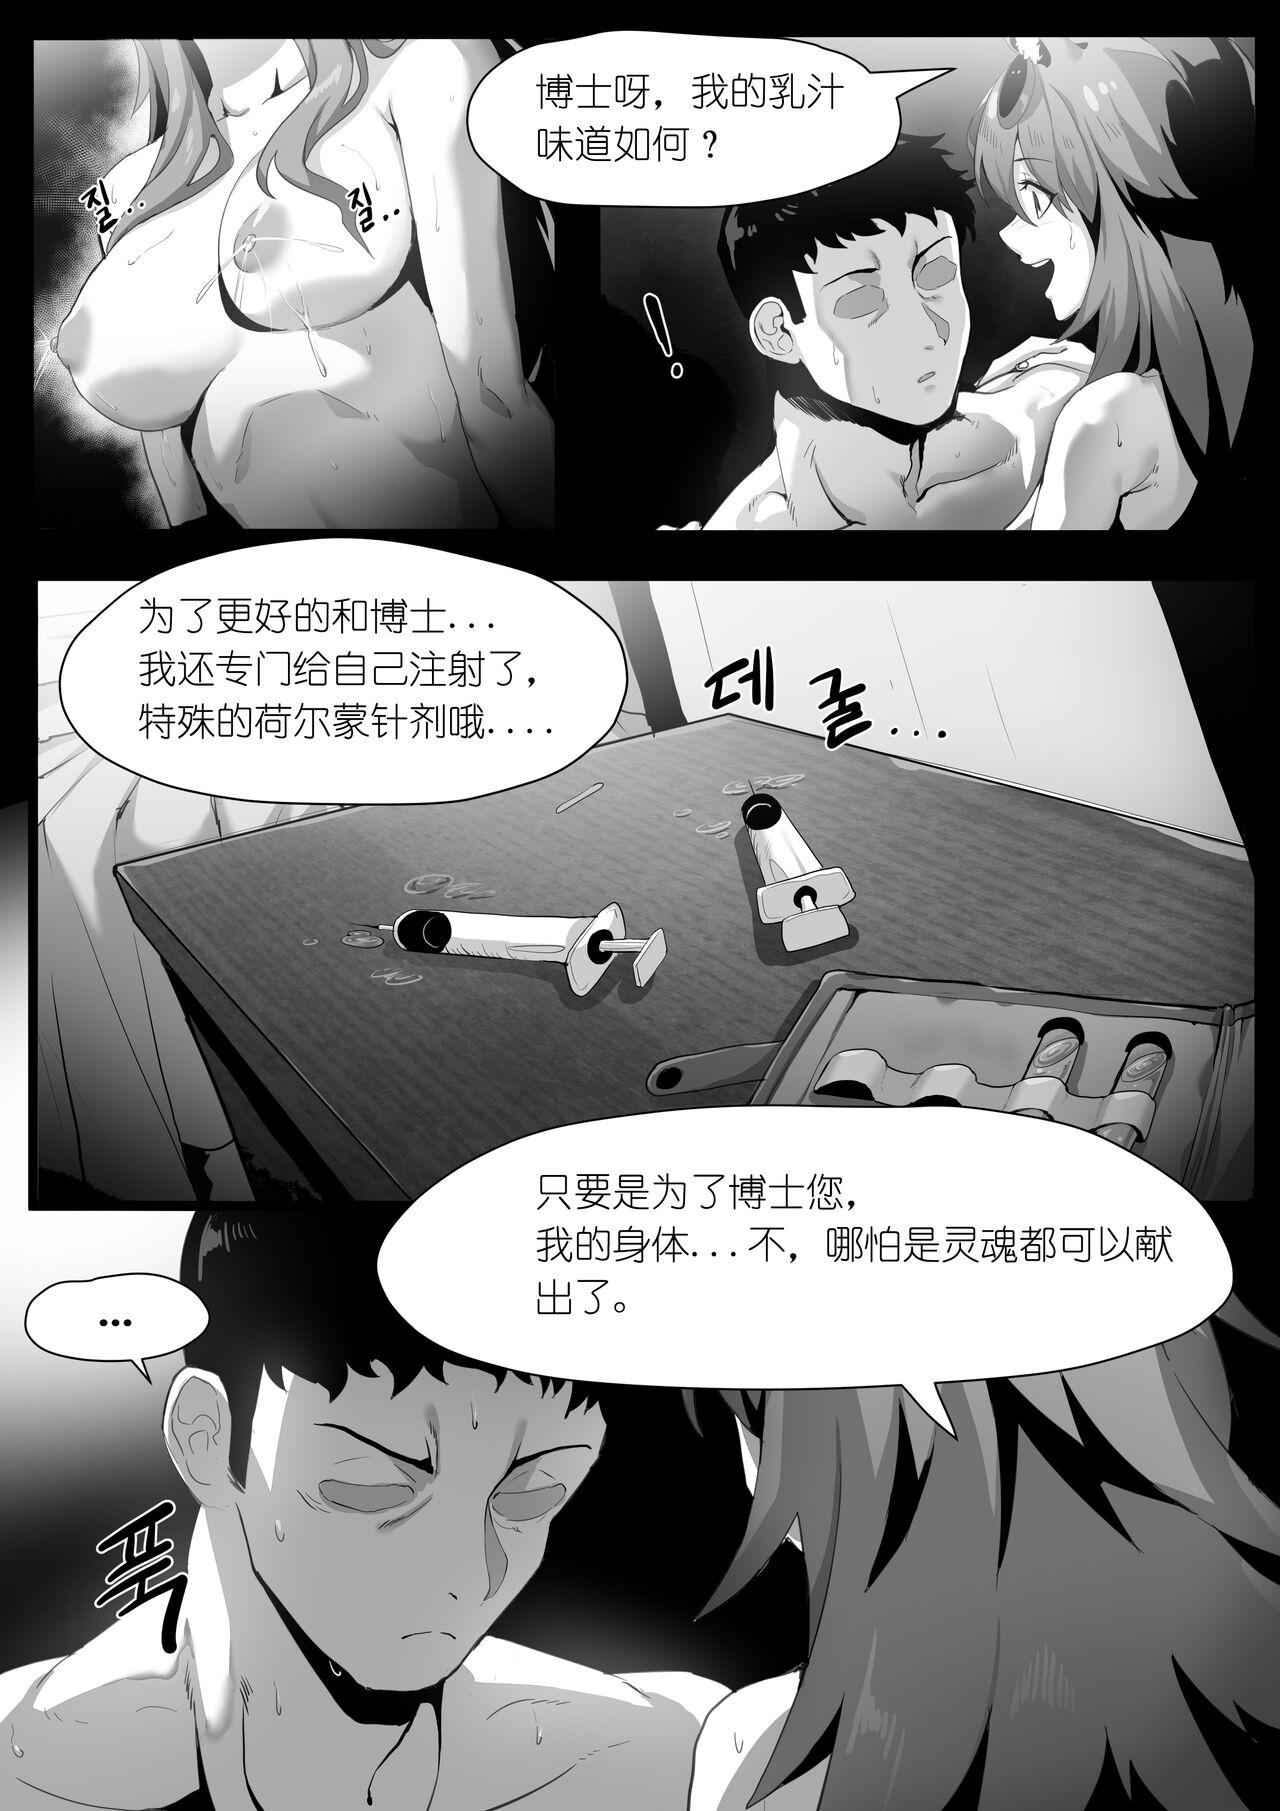 Jerkoff 欲望方舟记录3 - Arknights Freckles - Page 4